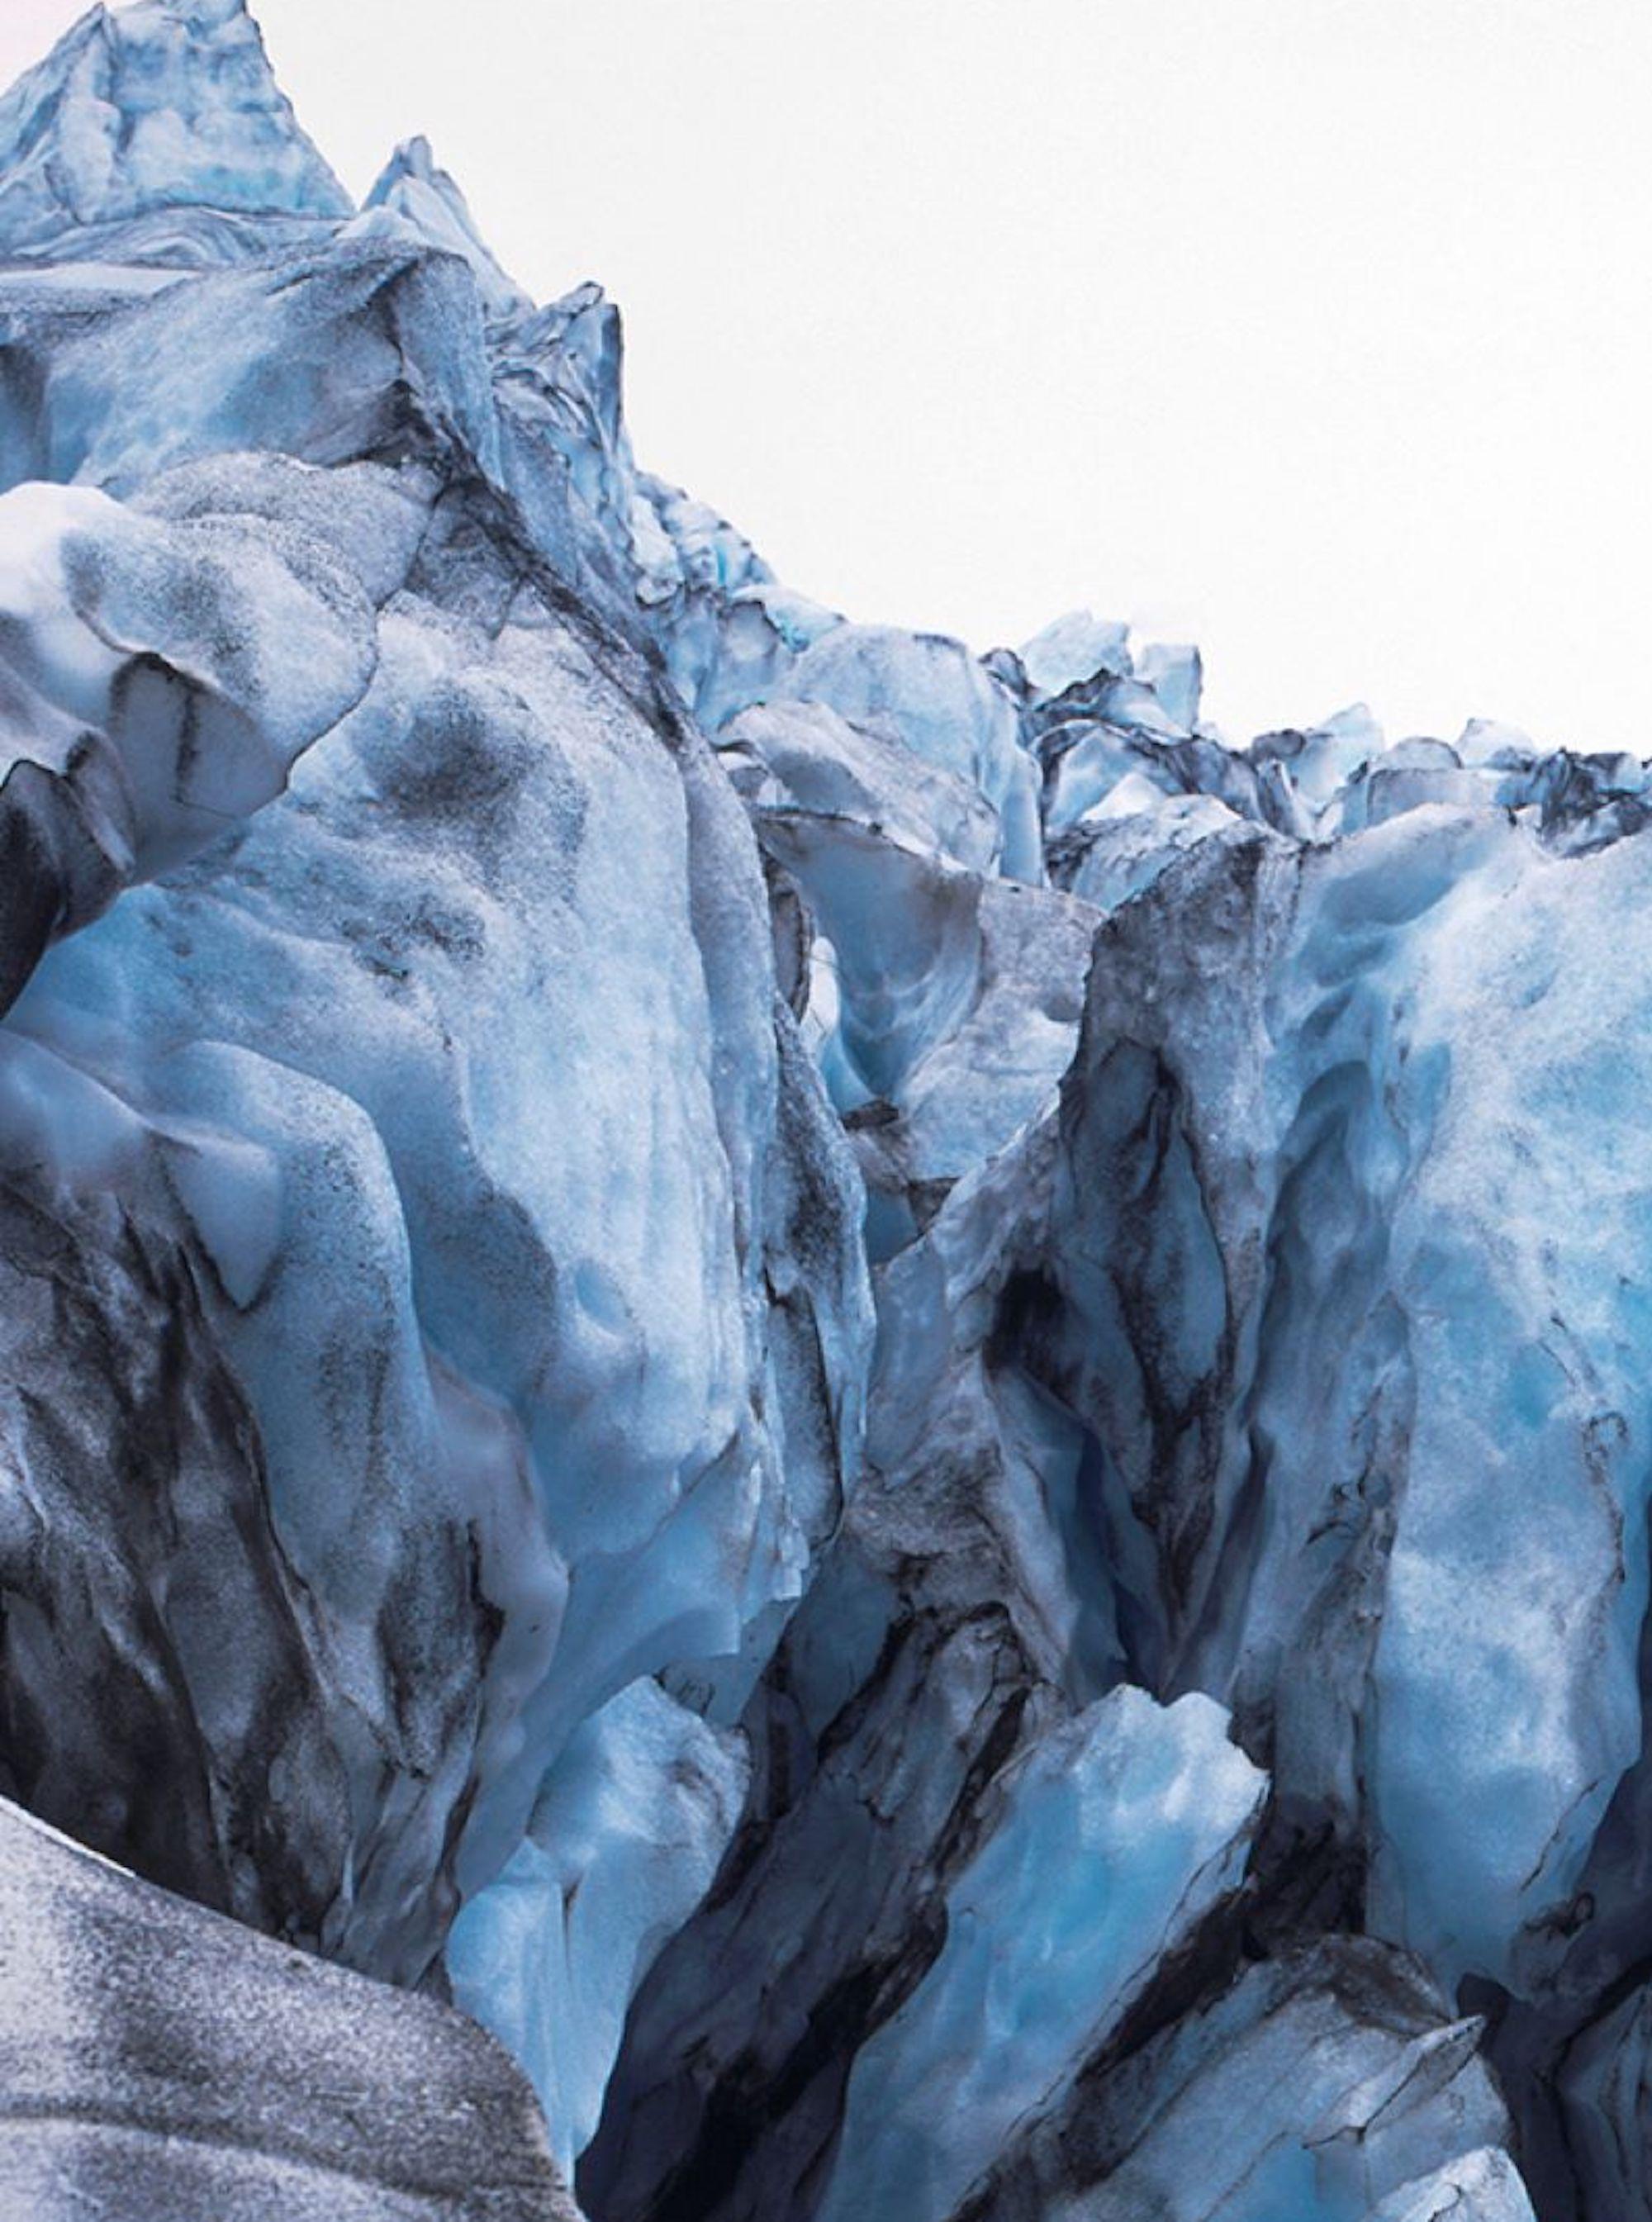 Glacier by Luca Marziale - Landscape photography, ice, winter, blue, Iceland For Sale 2